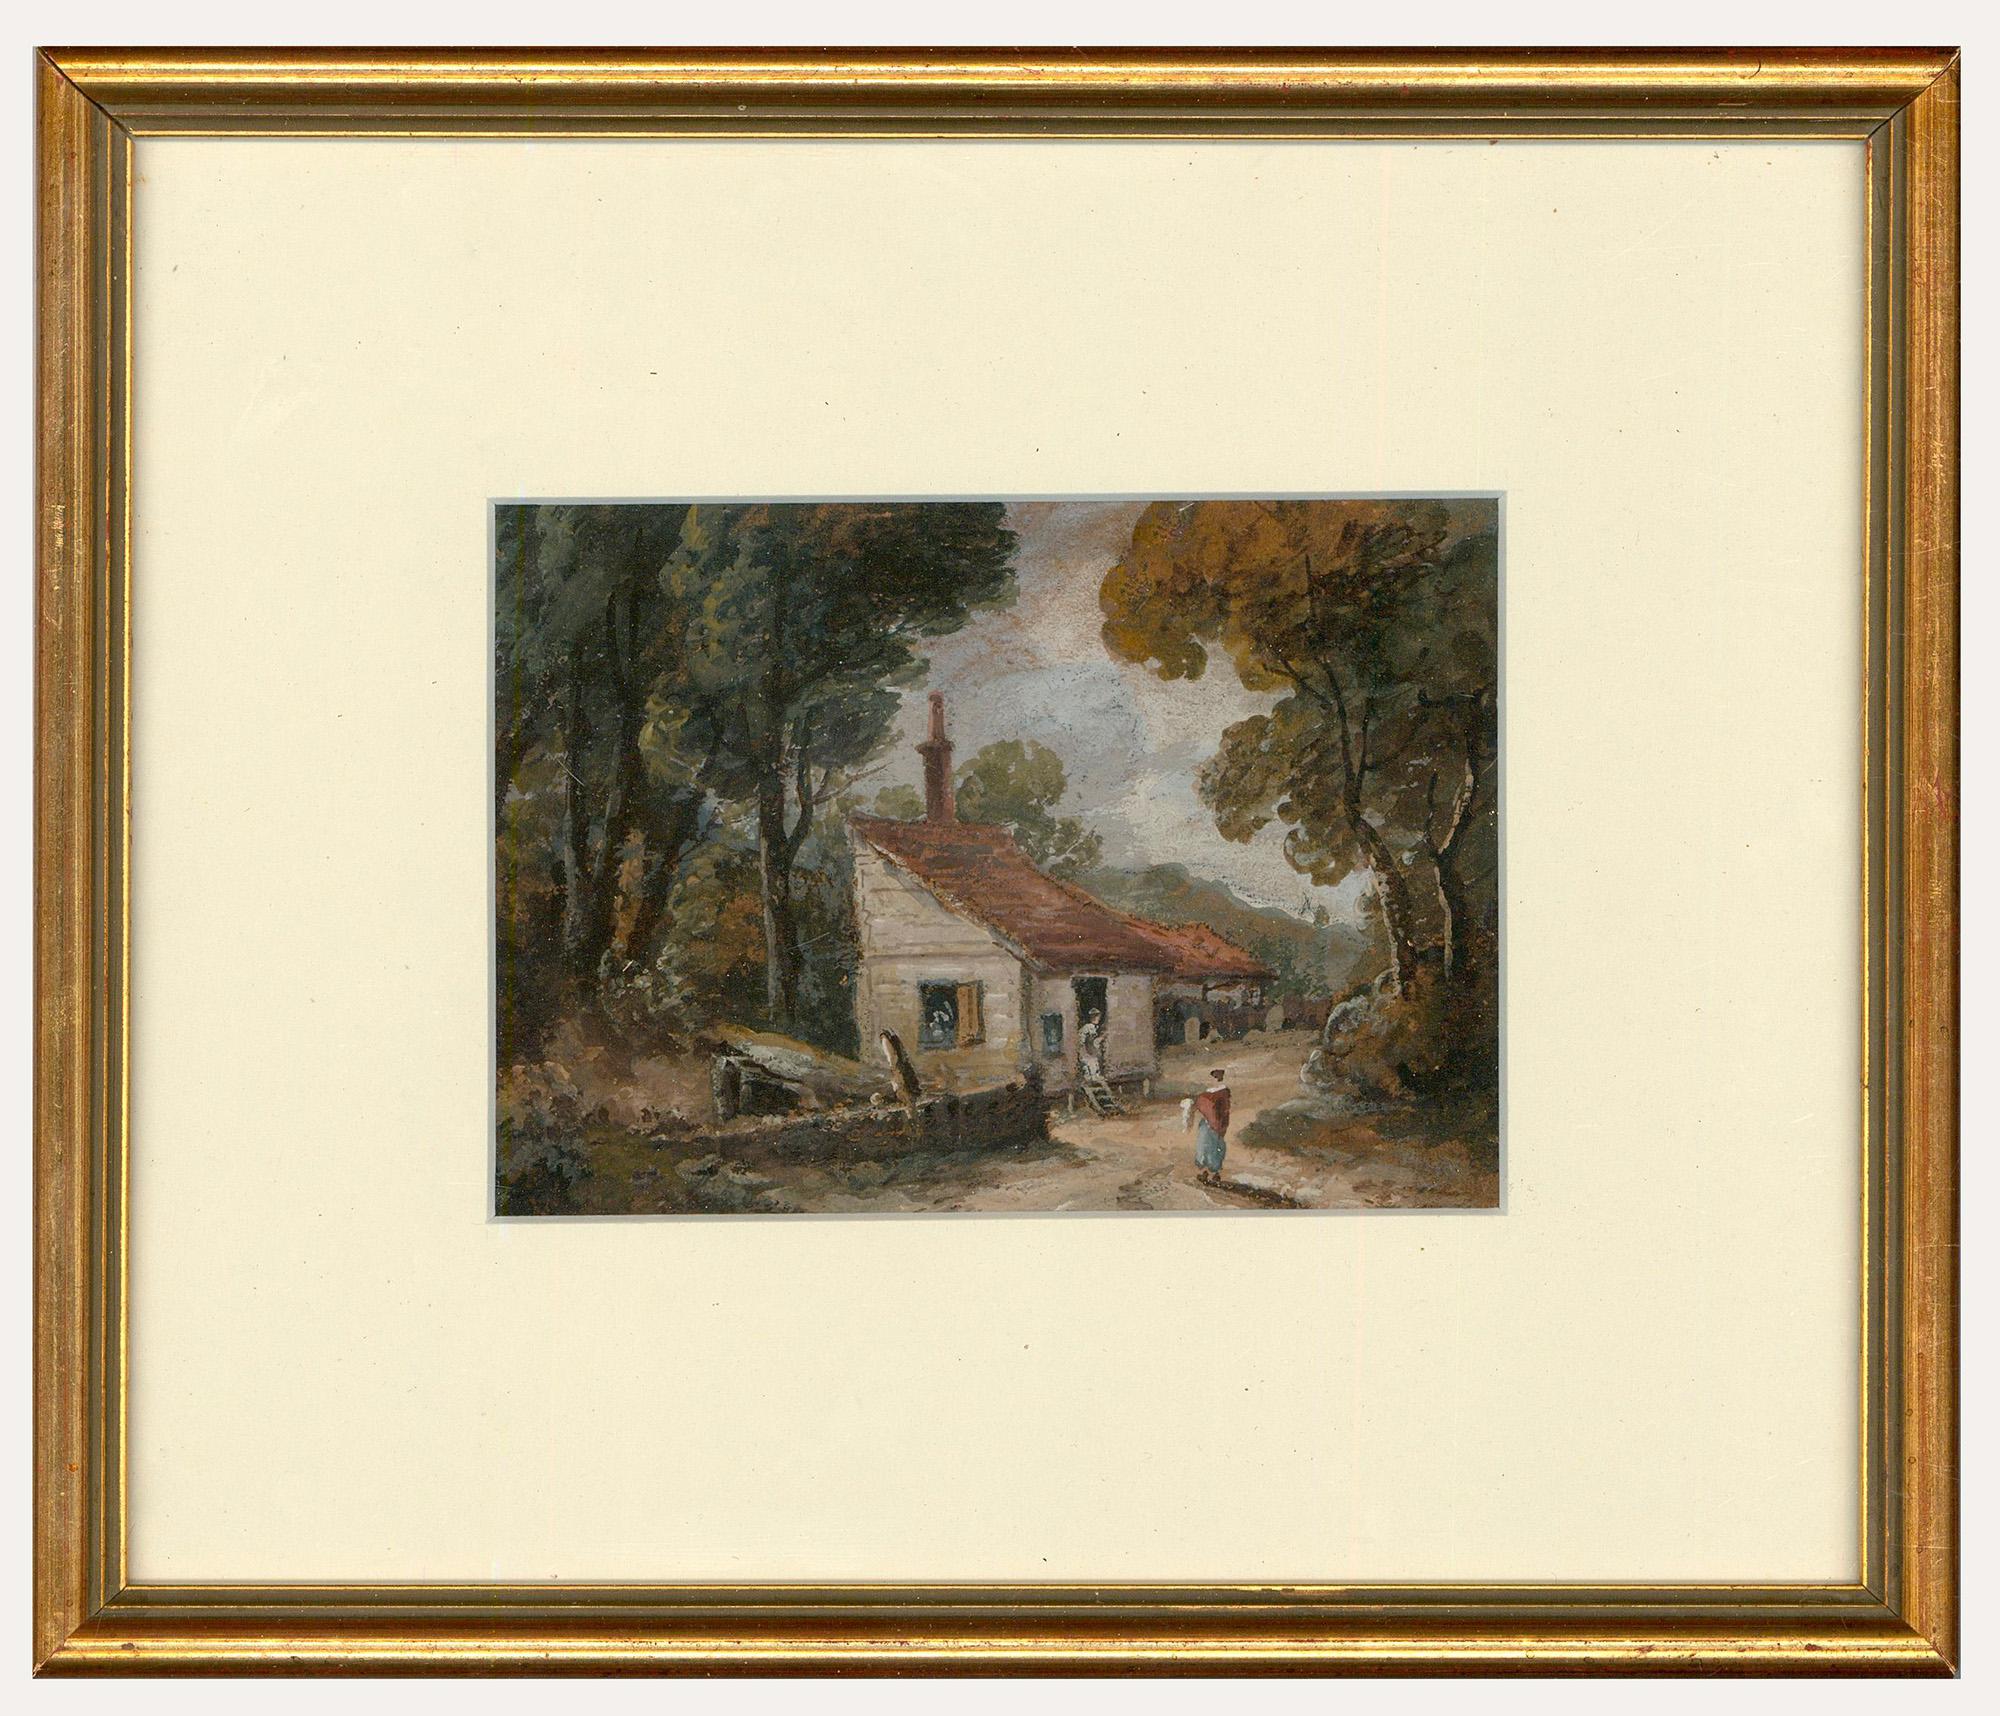 Unknown Landscape Art - Attrib. William George Jennings (1763-1854) - Watercolour, Cottage in the Woods